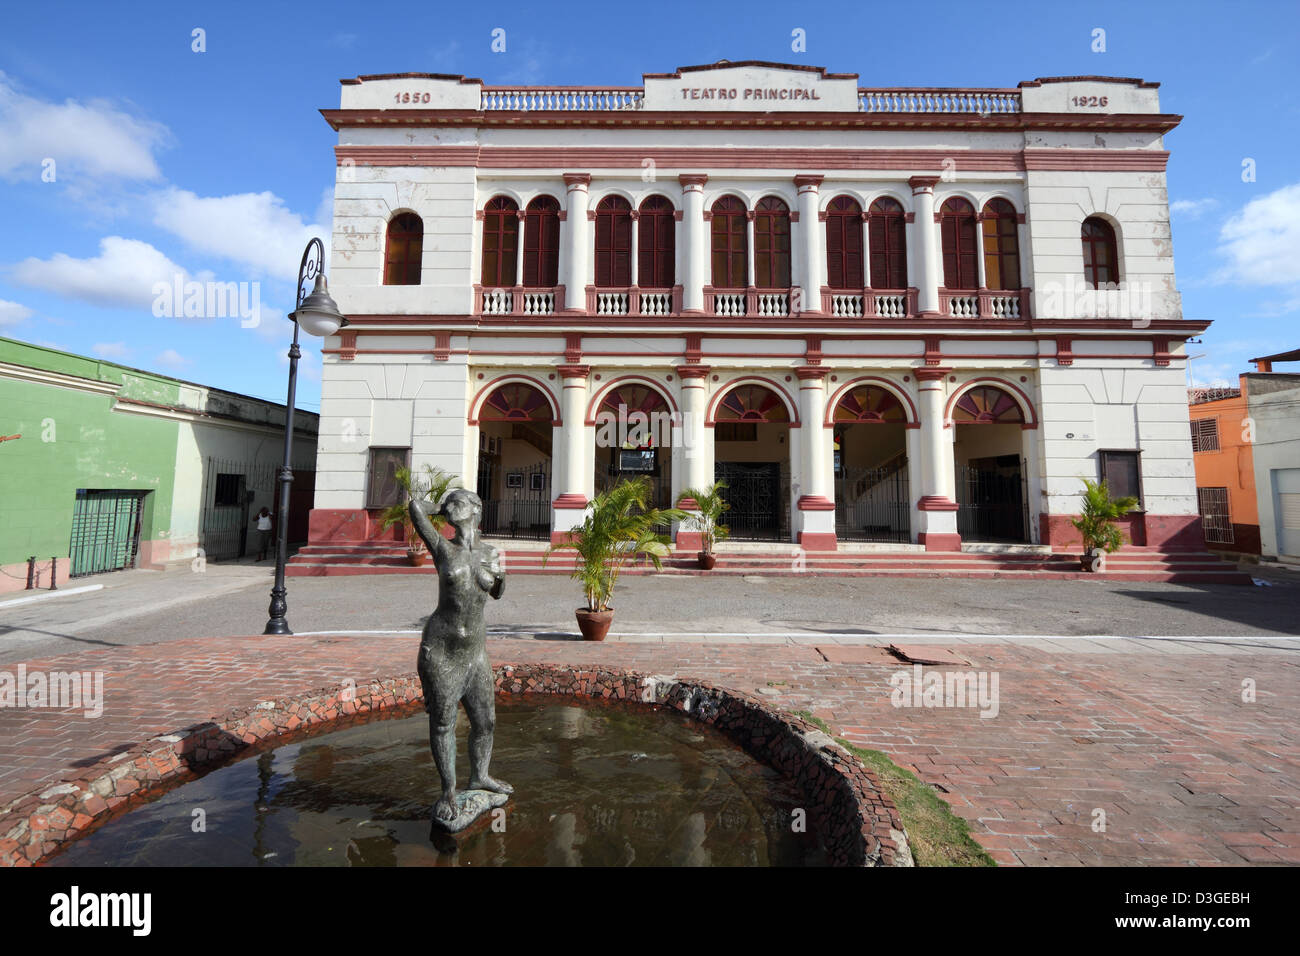 Camaguey, Cuba - old town listed on UNESCO World Heritage List. Teatro Principal - the theatre. Stock Photo